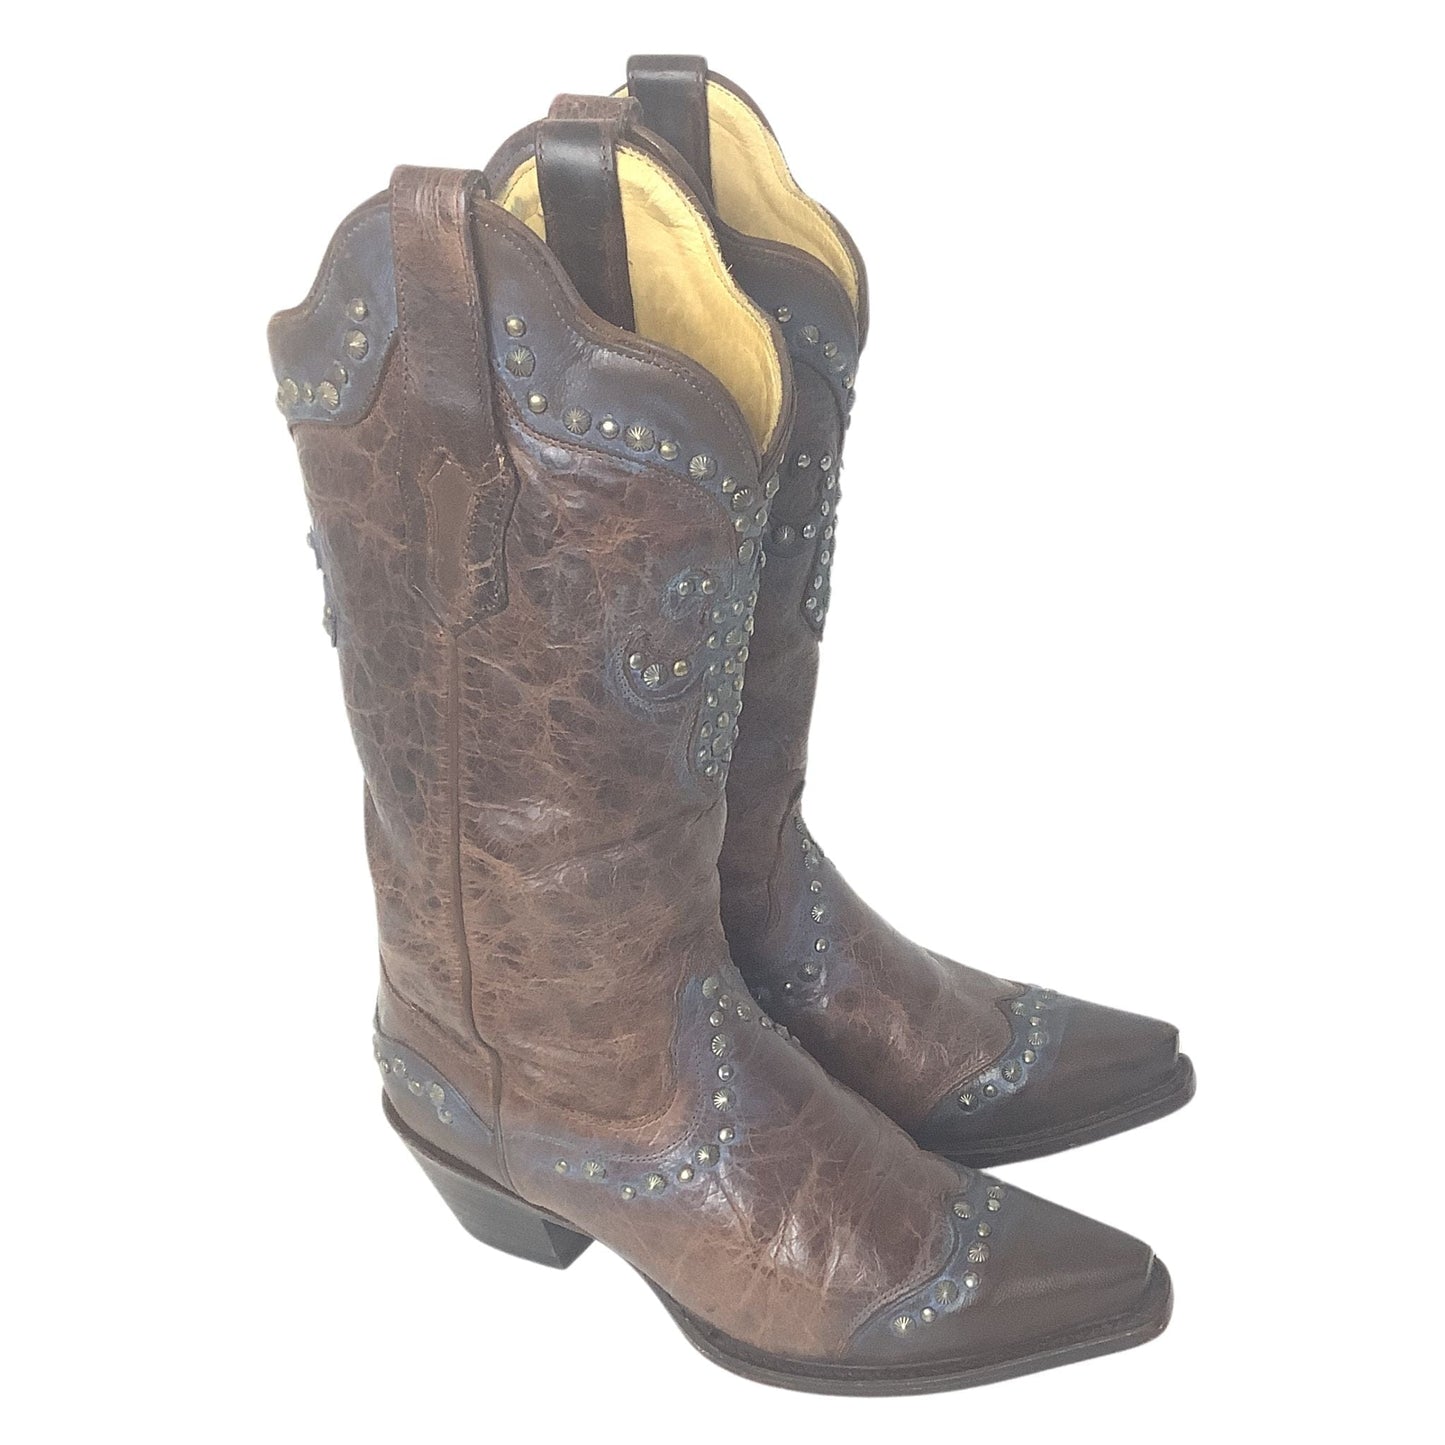 Studded Cowboy Boots 6.5 / Brown / Y2K - Now